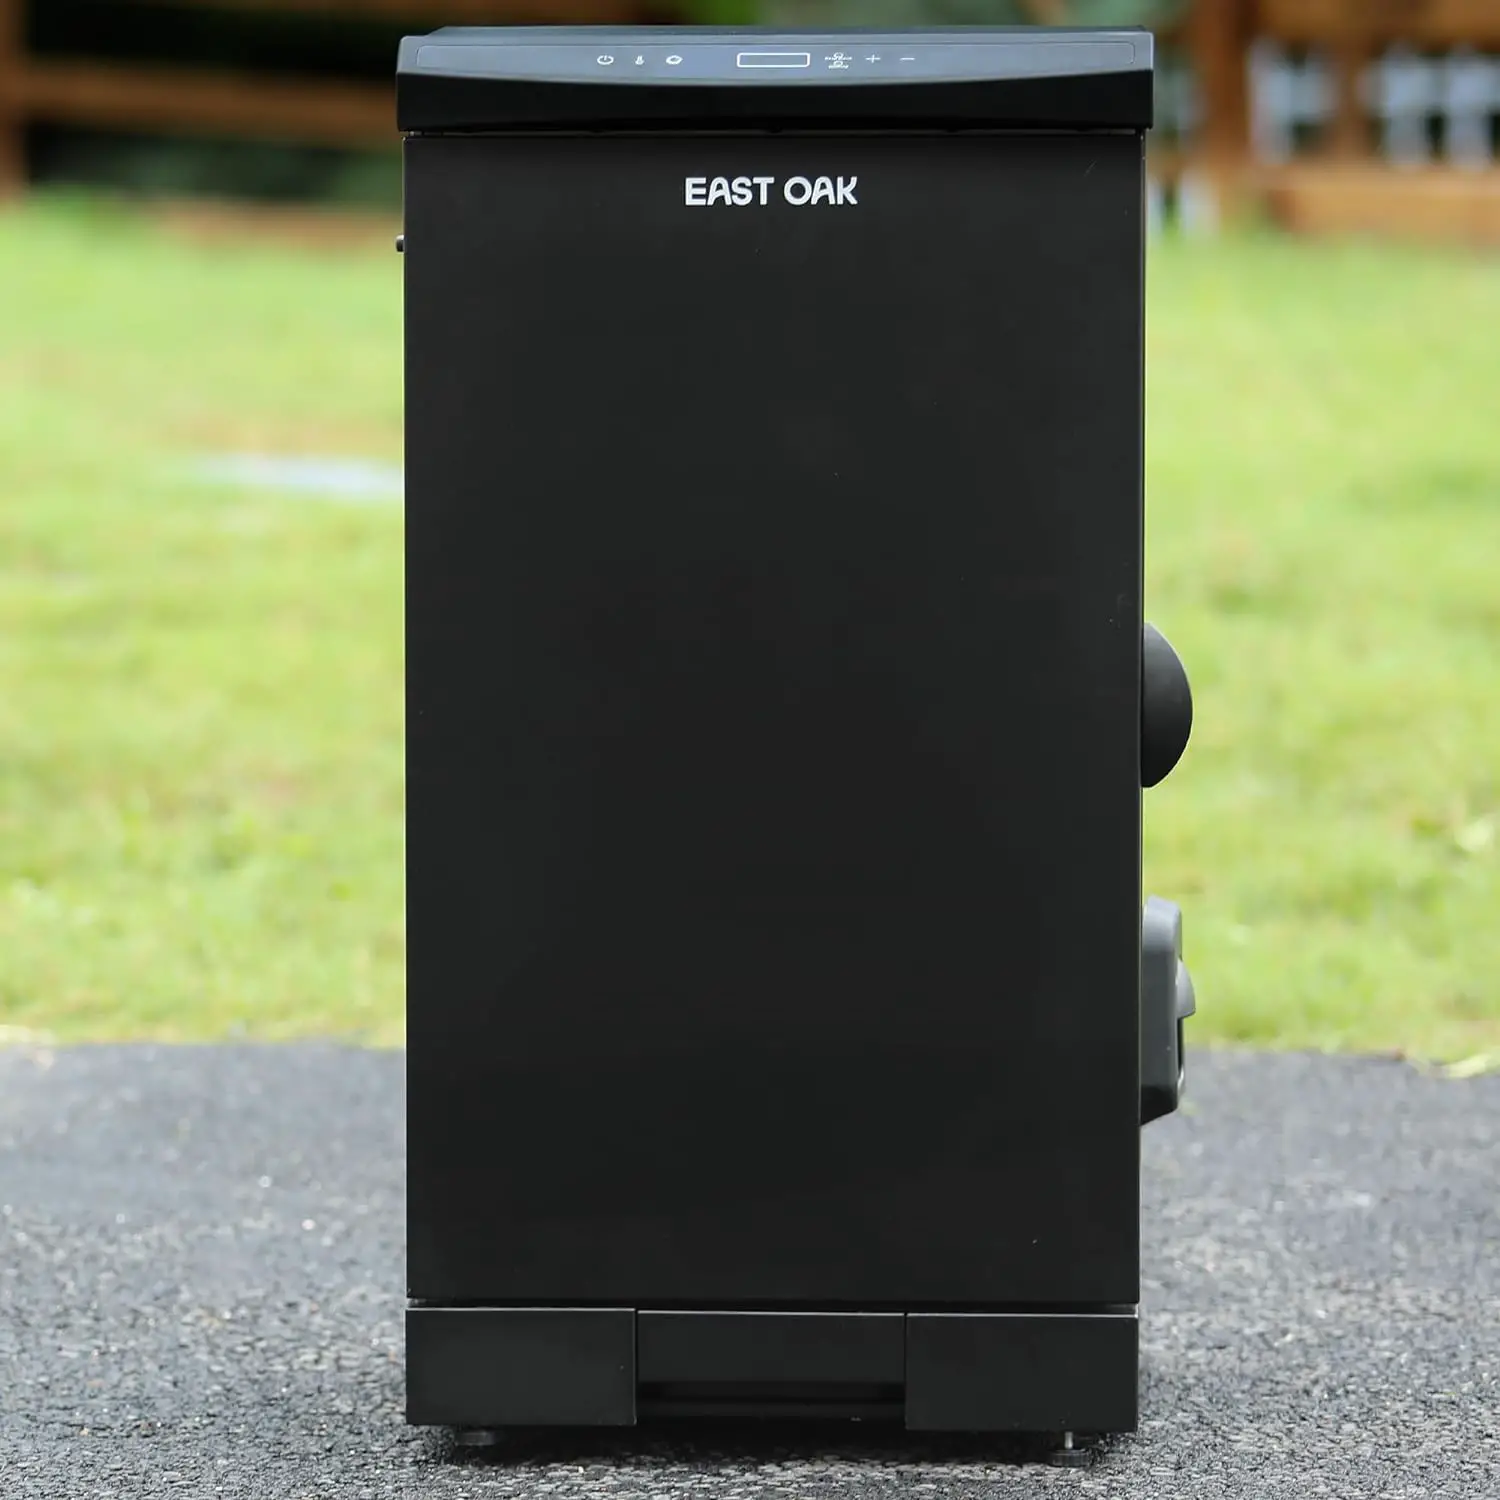 You are currently viewing EAST OAK 30-inch Electric Smoker